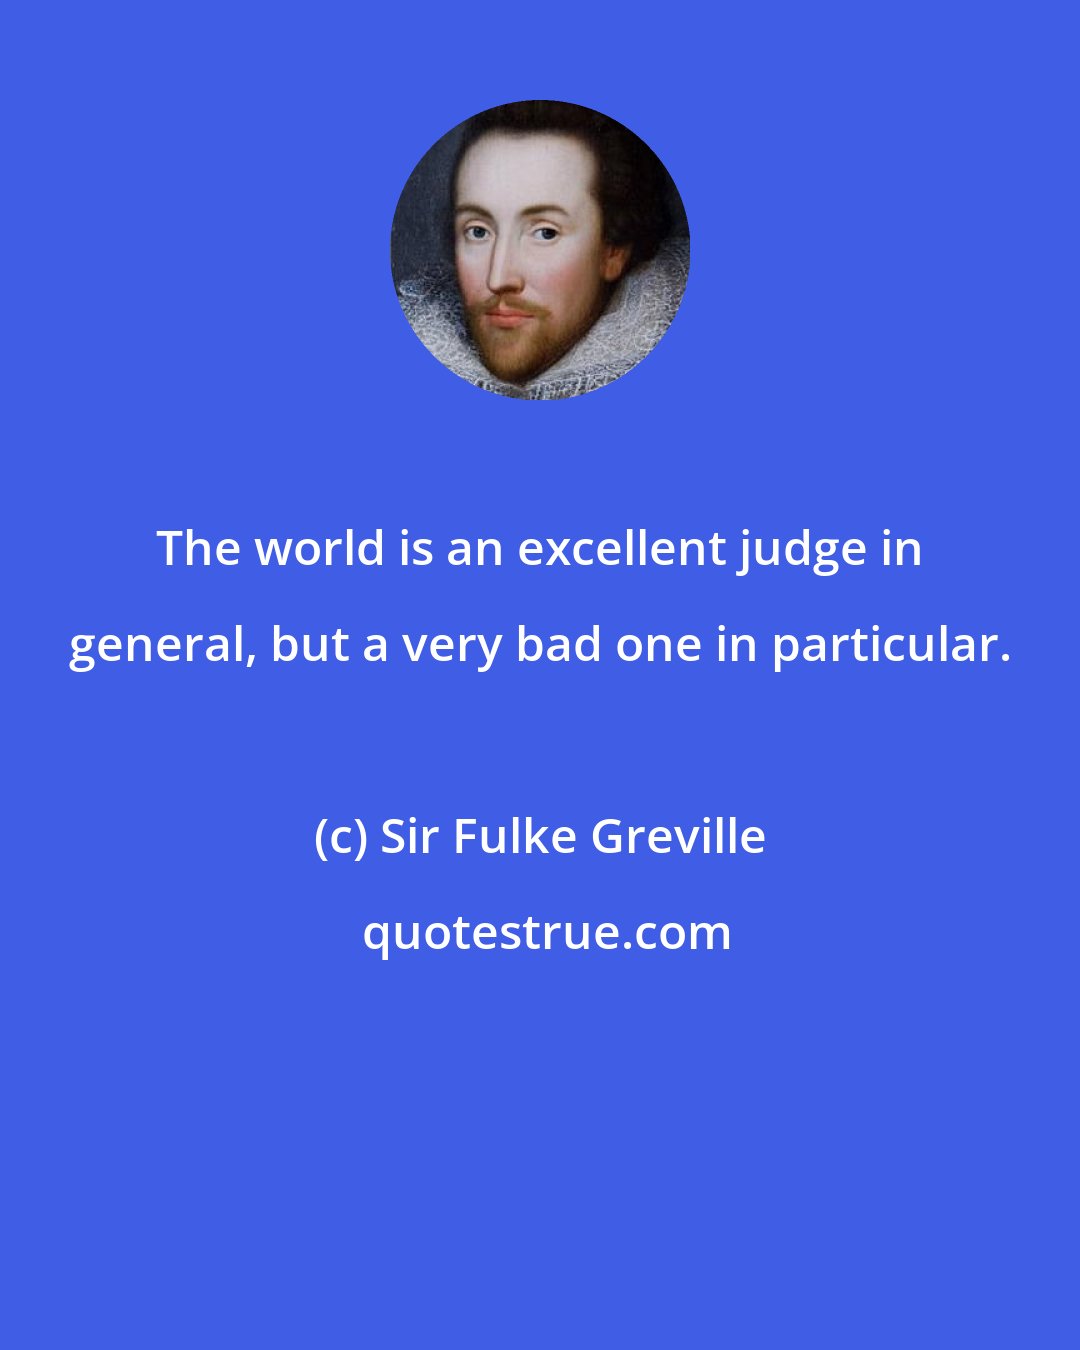 Sir Fulke Greville: The world is an excellent judge in general, but a very bad one in particular.